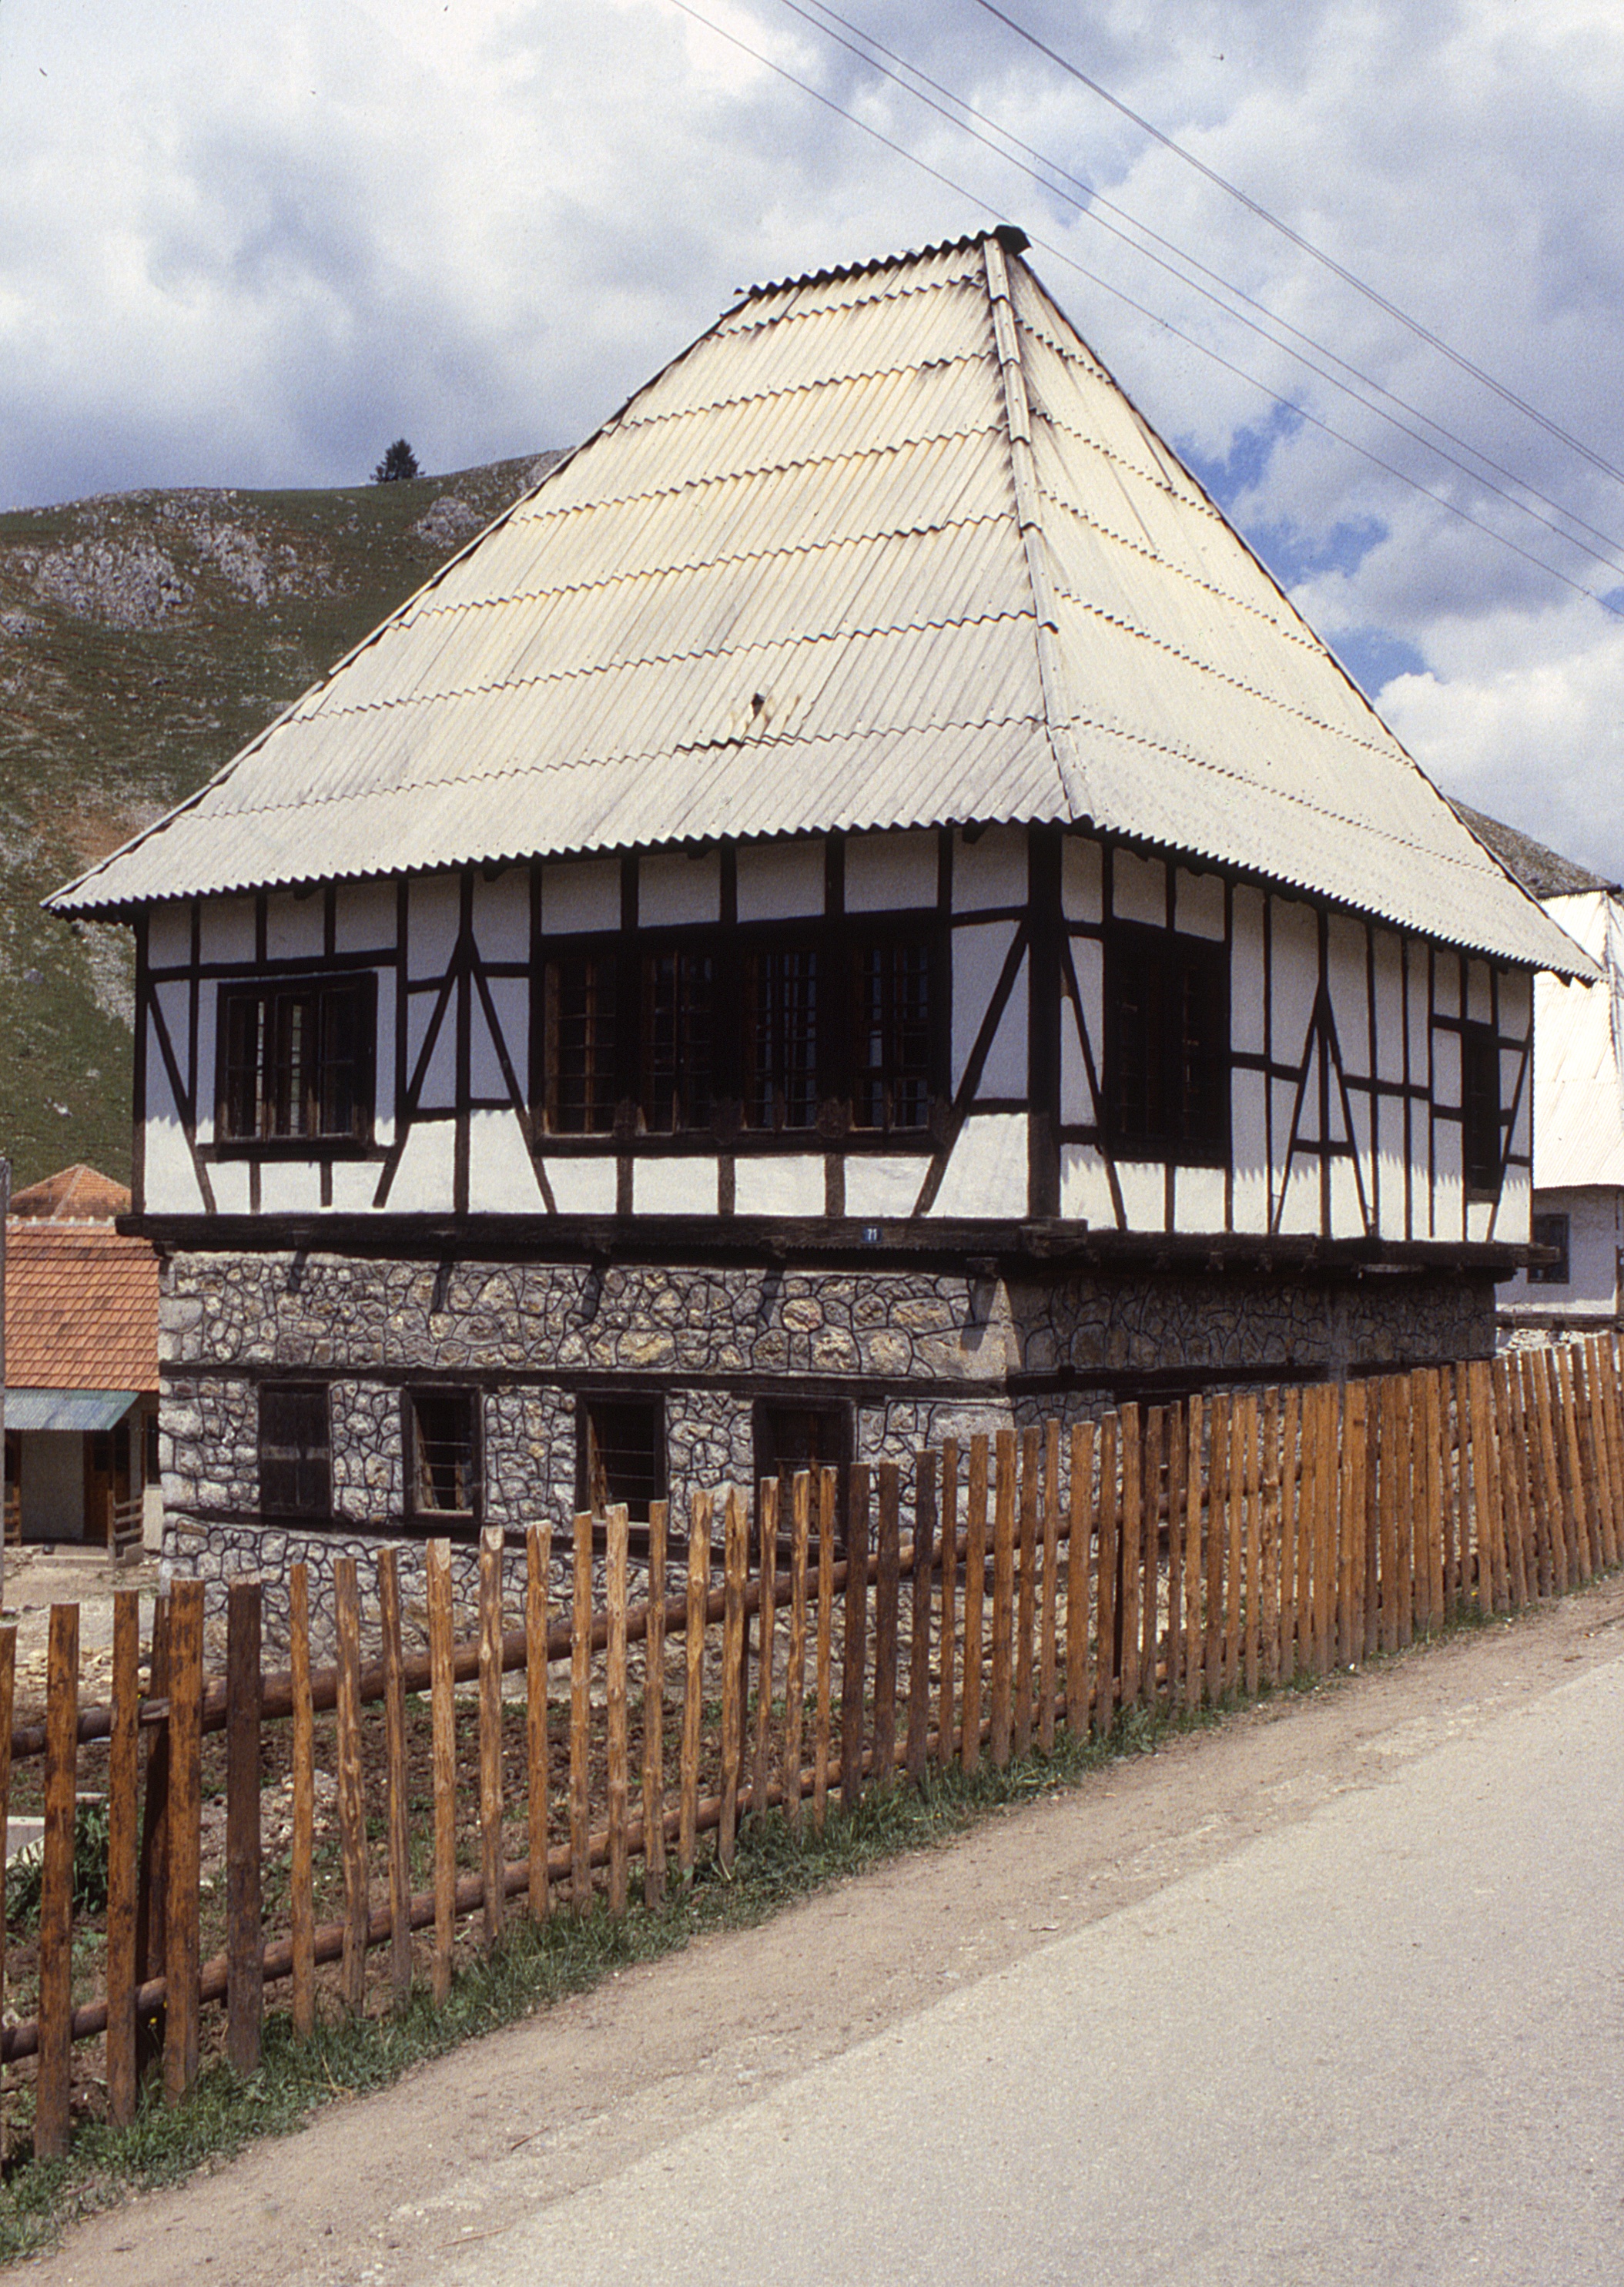 <p>The kuća has a large number of windows on these facades visible from the road. The wooden reinforcing strips are continuous and provide support over the windows in the stone walls. The wooden reinforcing strips are normally created by setting face members on the interior and exterior surfaces that are connected by cross members mortised into the face members; this allows masonry work to interlock with the strips. The diagonal timber bracing in the upper walls stabilize the corners and allow large openings in these walls.</p>